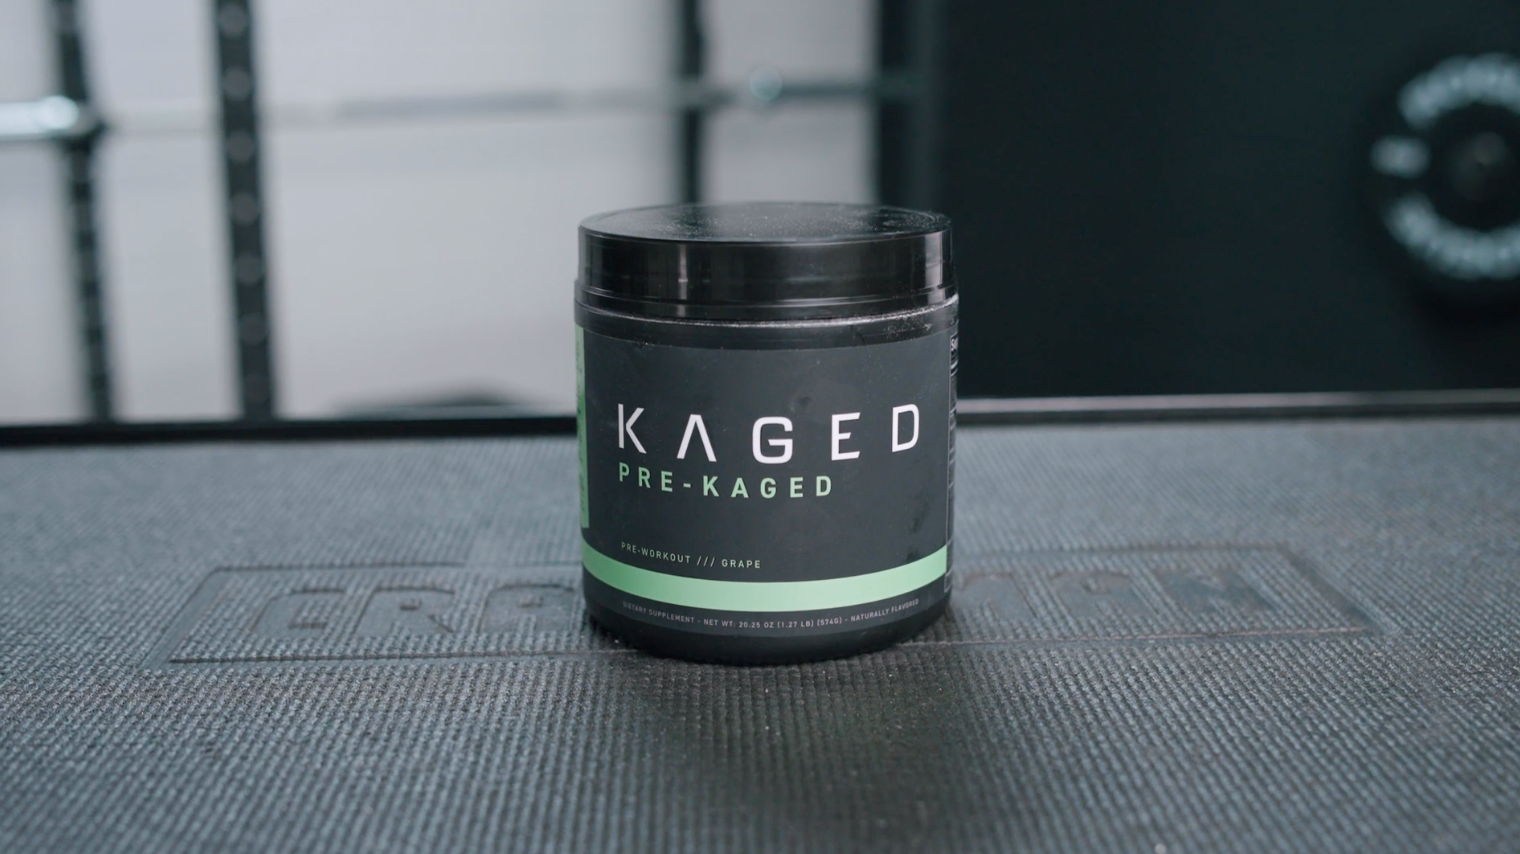 BarBend Testing Kaged Pre-Kaged Pre-Workout Supplement